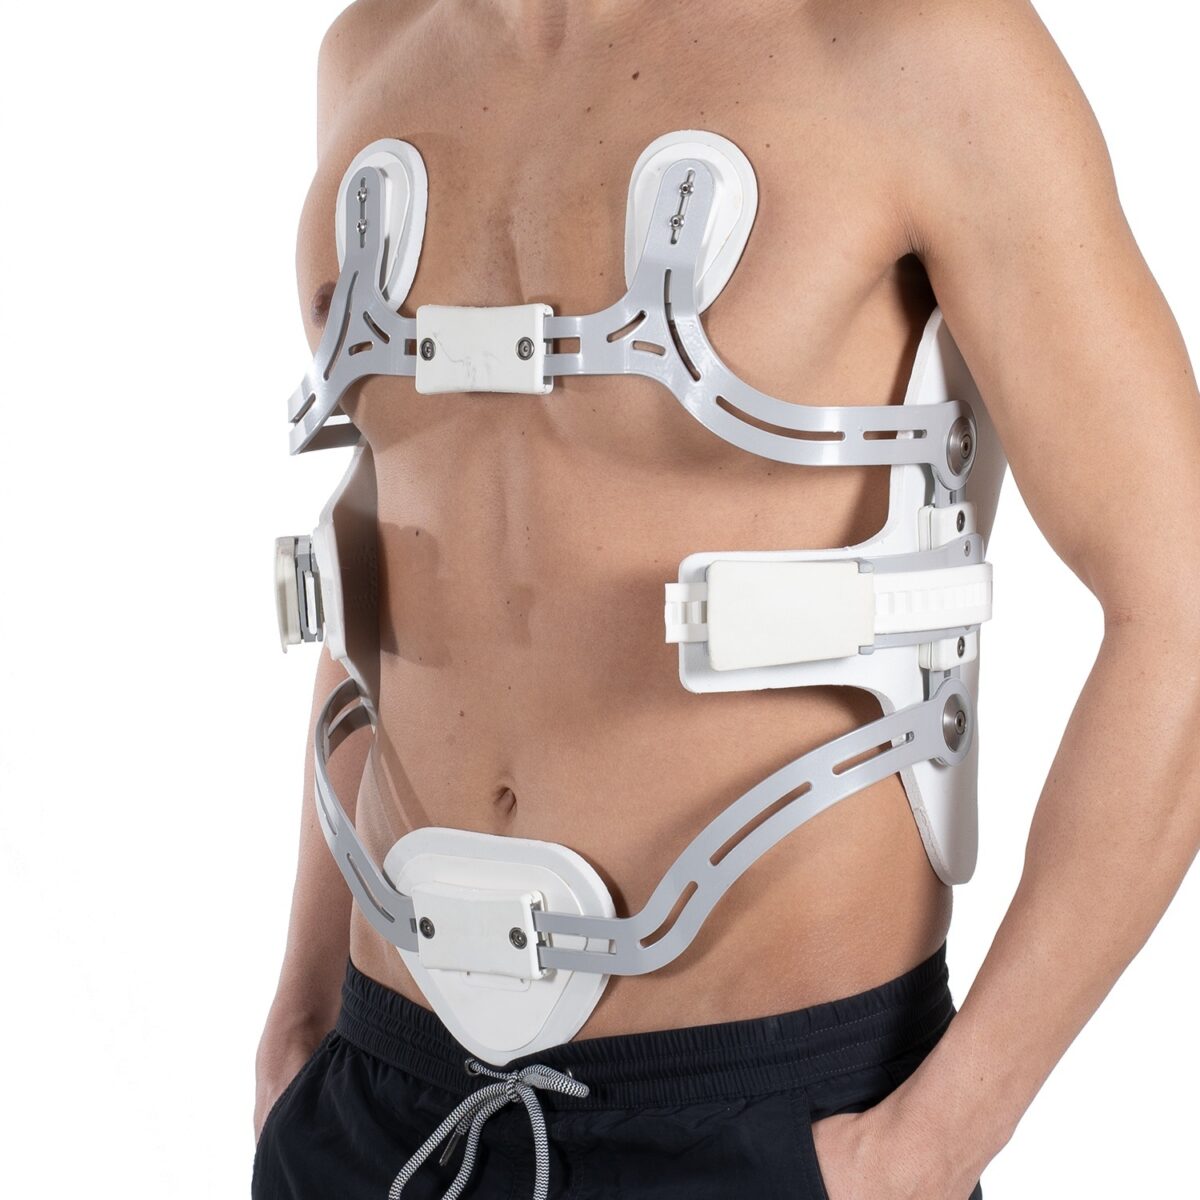 wingmed orthopedic equipments W450 hyperextension corset 4 points 16